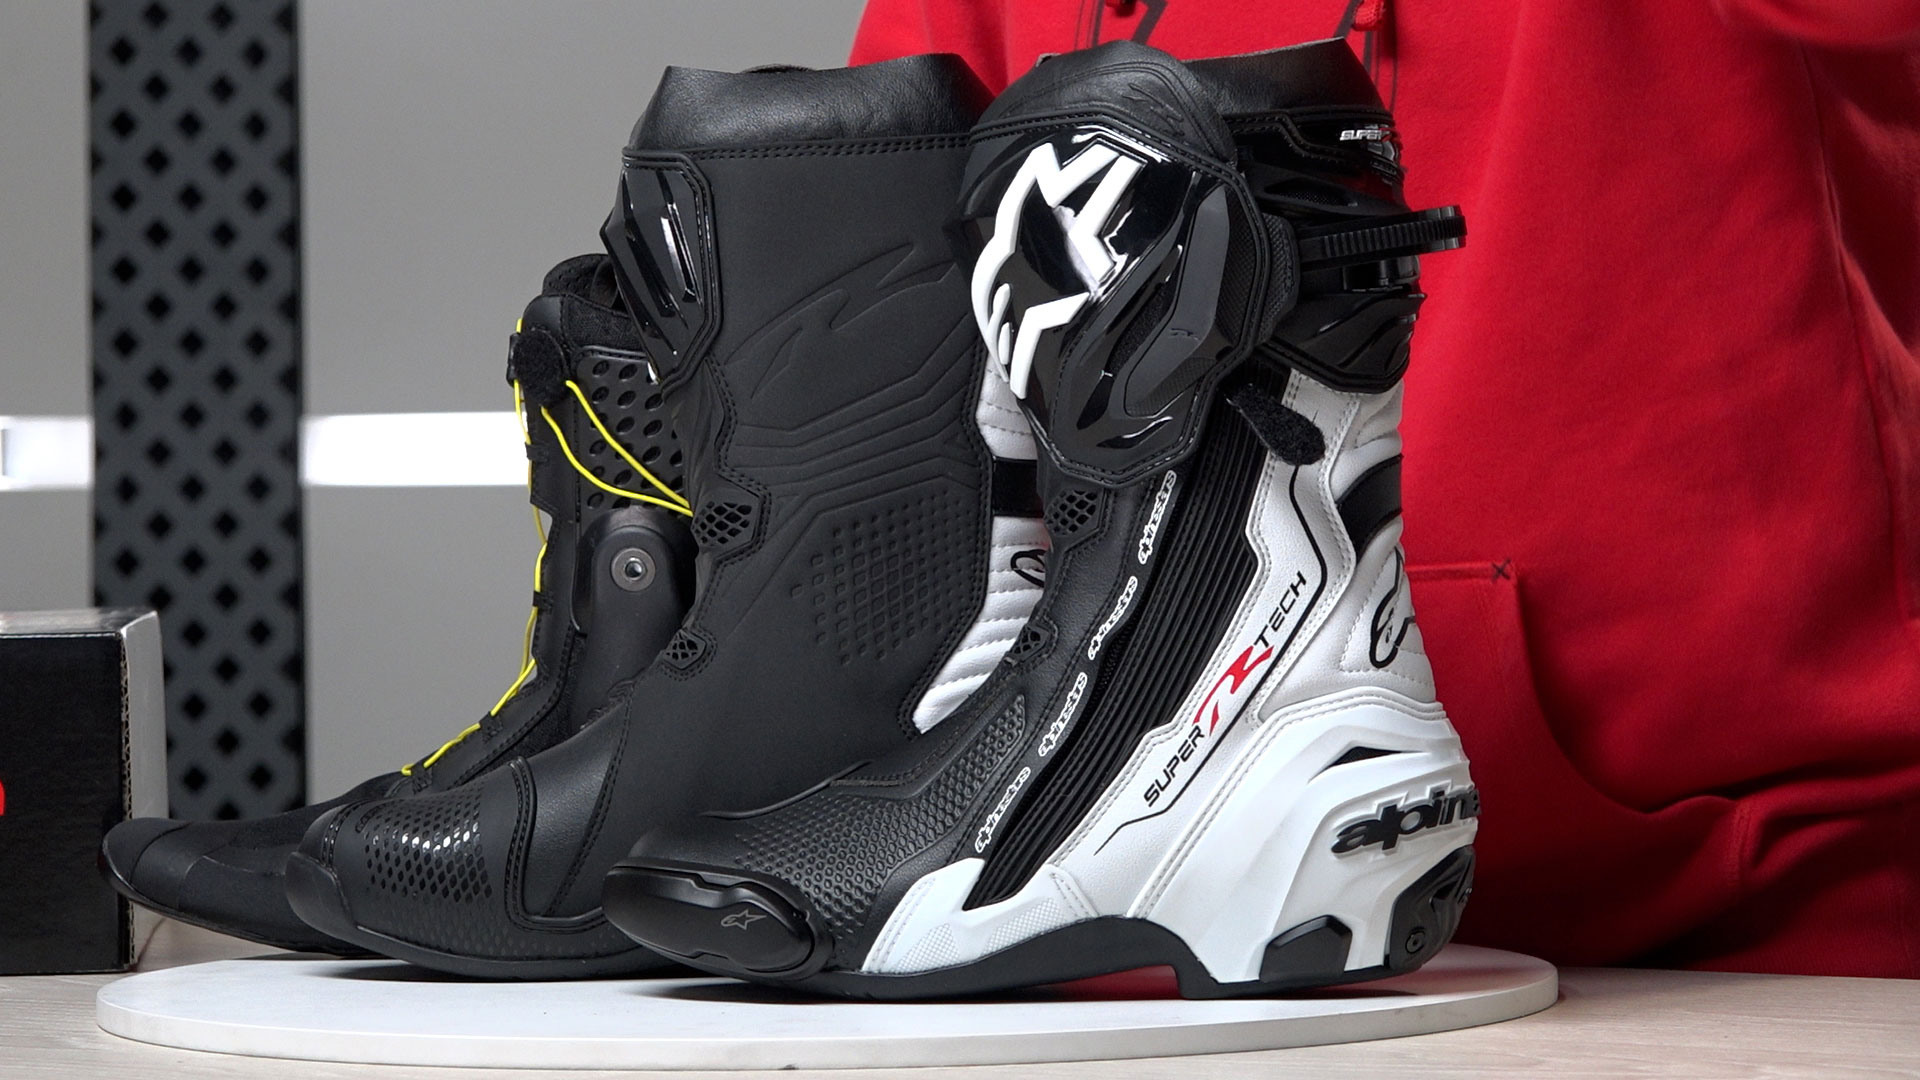 Alpinestars Supertech-R 2020 Boots, price and opinions · Motocard